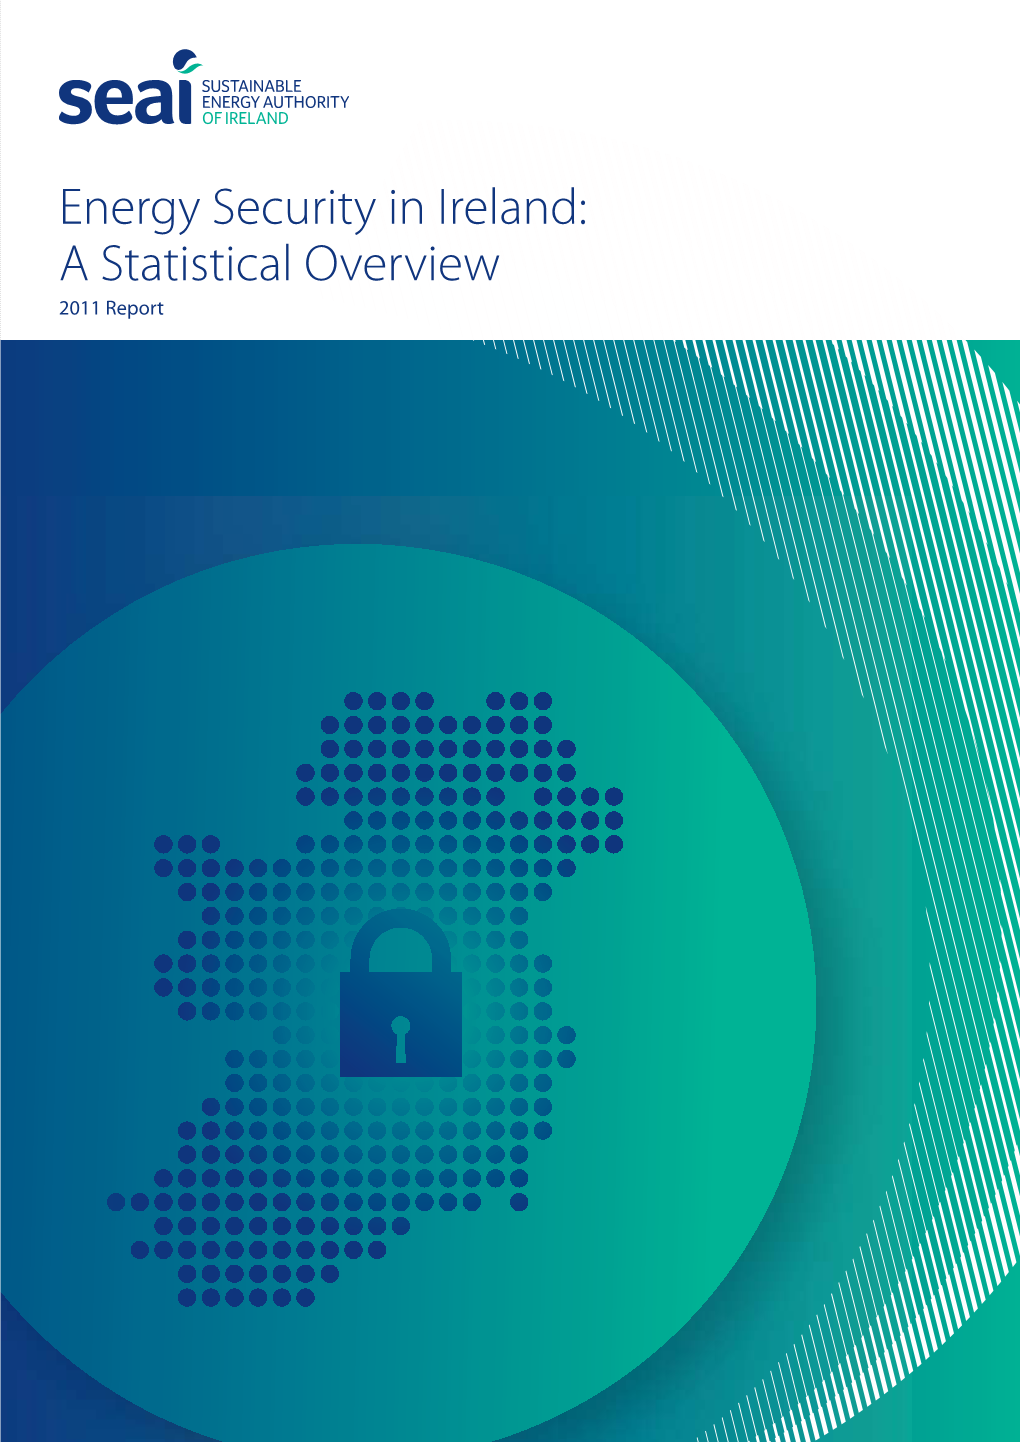 Energy Security in Ireland: a Statistical Overview 2011 Report